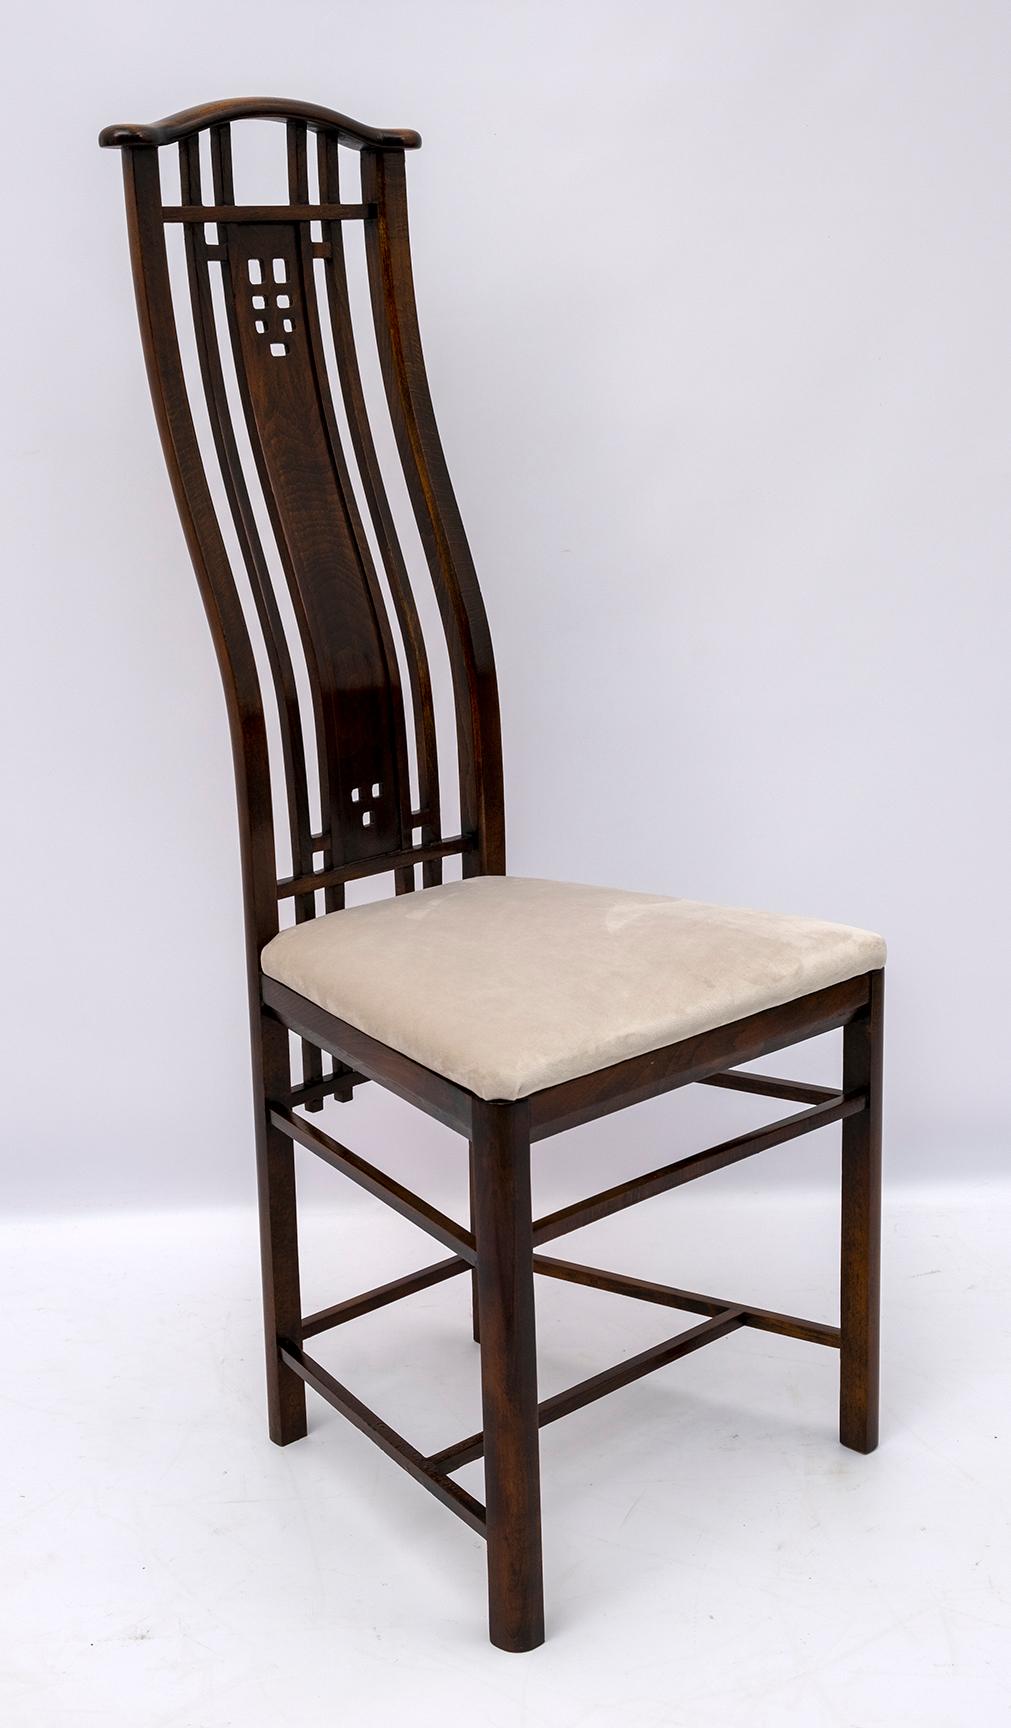 These four chairs were made by the famous Italian company Giorgetti, the four chairs are in stained beech, with a high back, the upholstery has been redone in ivory velvet. The set was polished with shellac, leaving the original patina.

The table